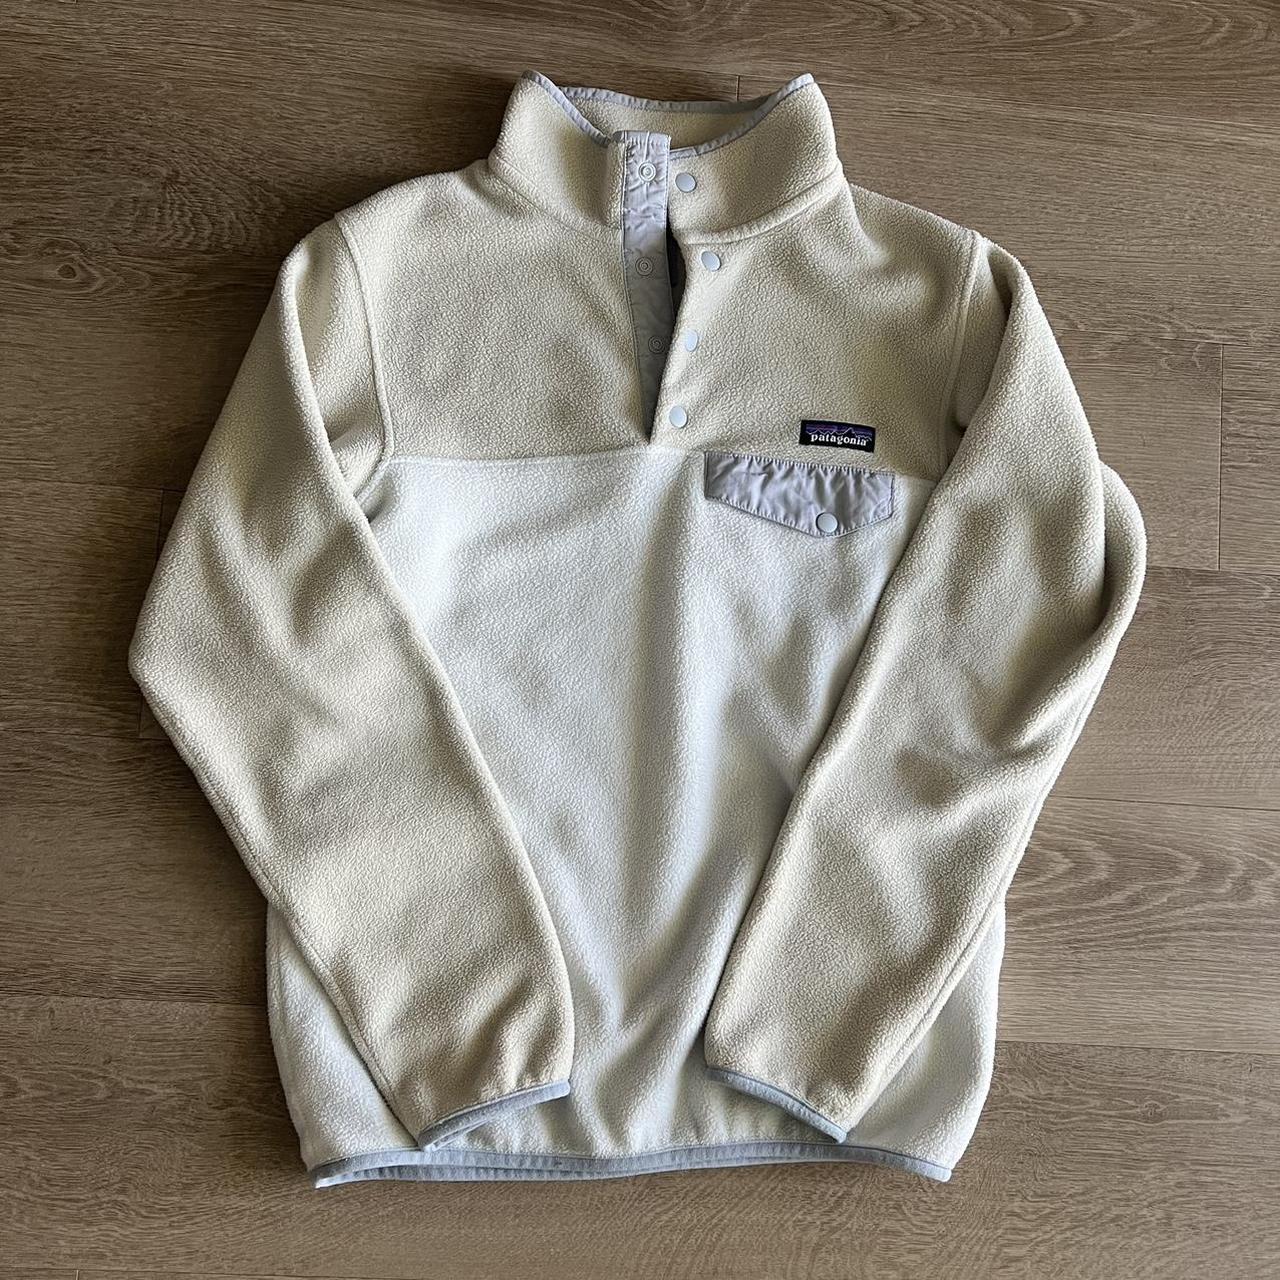 Women's Patagonia Cold Weather Insulated Jacket - Depop